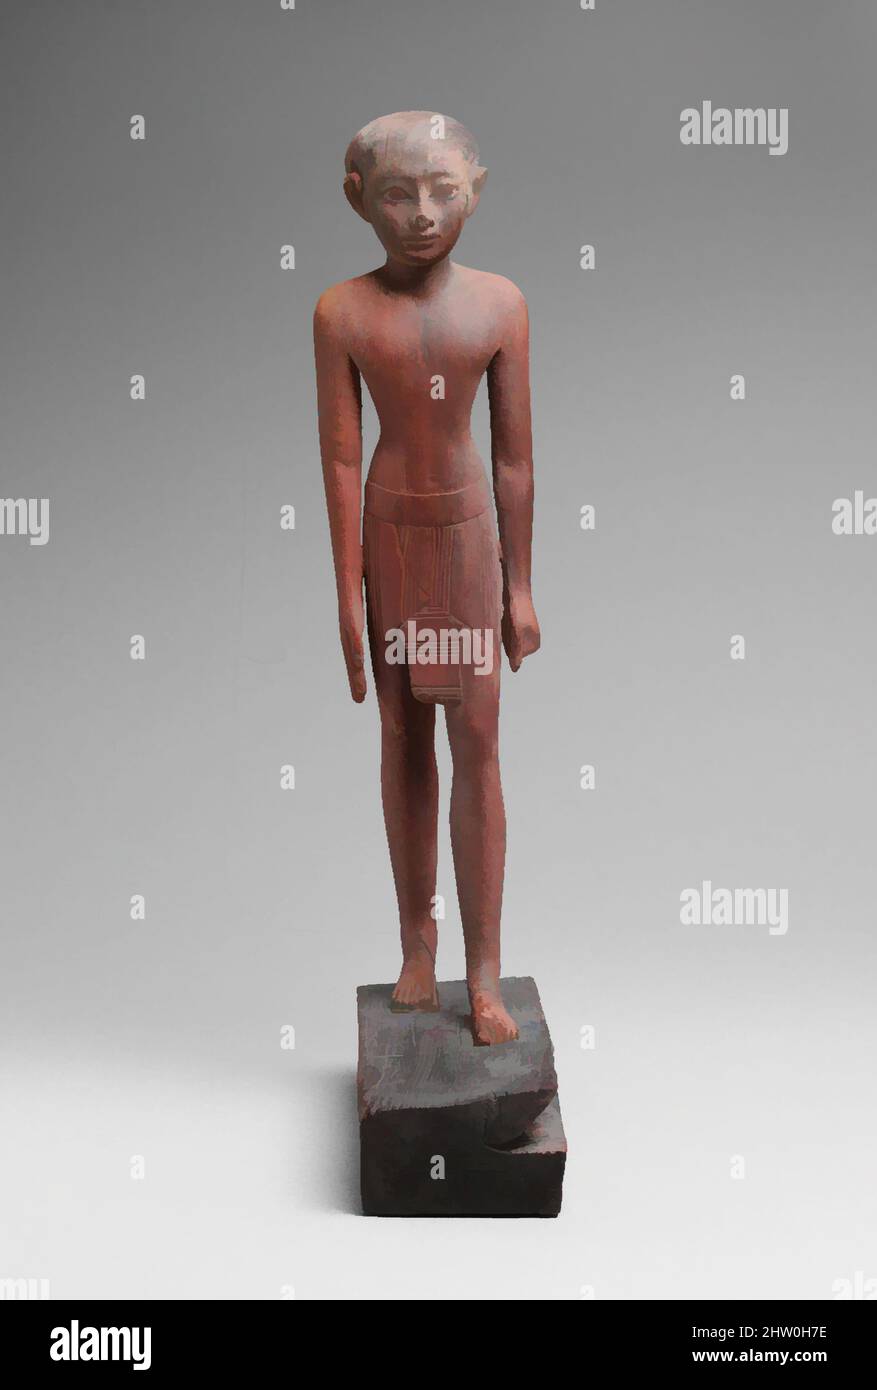 Art inspired by Statuette of Huwebenef, New Kingdom, Dynasty 18, early, ca. 1550–1479 B.C., From Egypt, Upper Egypt, Thebes, Asasif, Tomb CC 37, Hall (C), burial 24, inside coffin, Carnarvon/Carter excavations, 1911, Wood, H. 35 cm (13 3/4 in); w. 6.6 cm (2 5/8 in); d. 19.2 cm (7 9/16, Classic works modernized by Artotop with a splash of modernity. Shapes, color and value, eye-catching visual impact on art. Emotions through freedom of artworks in a contemporary way. A timeless message pursuing a wildly creative new direction. Artists turning to the digital medium and creating the Artotop NFT Stock Photo